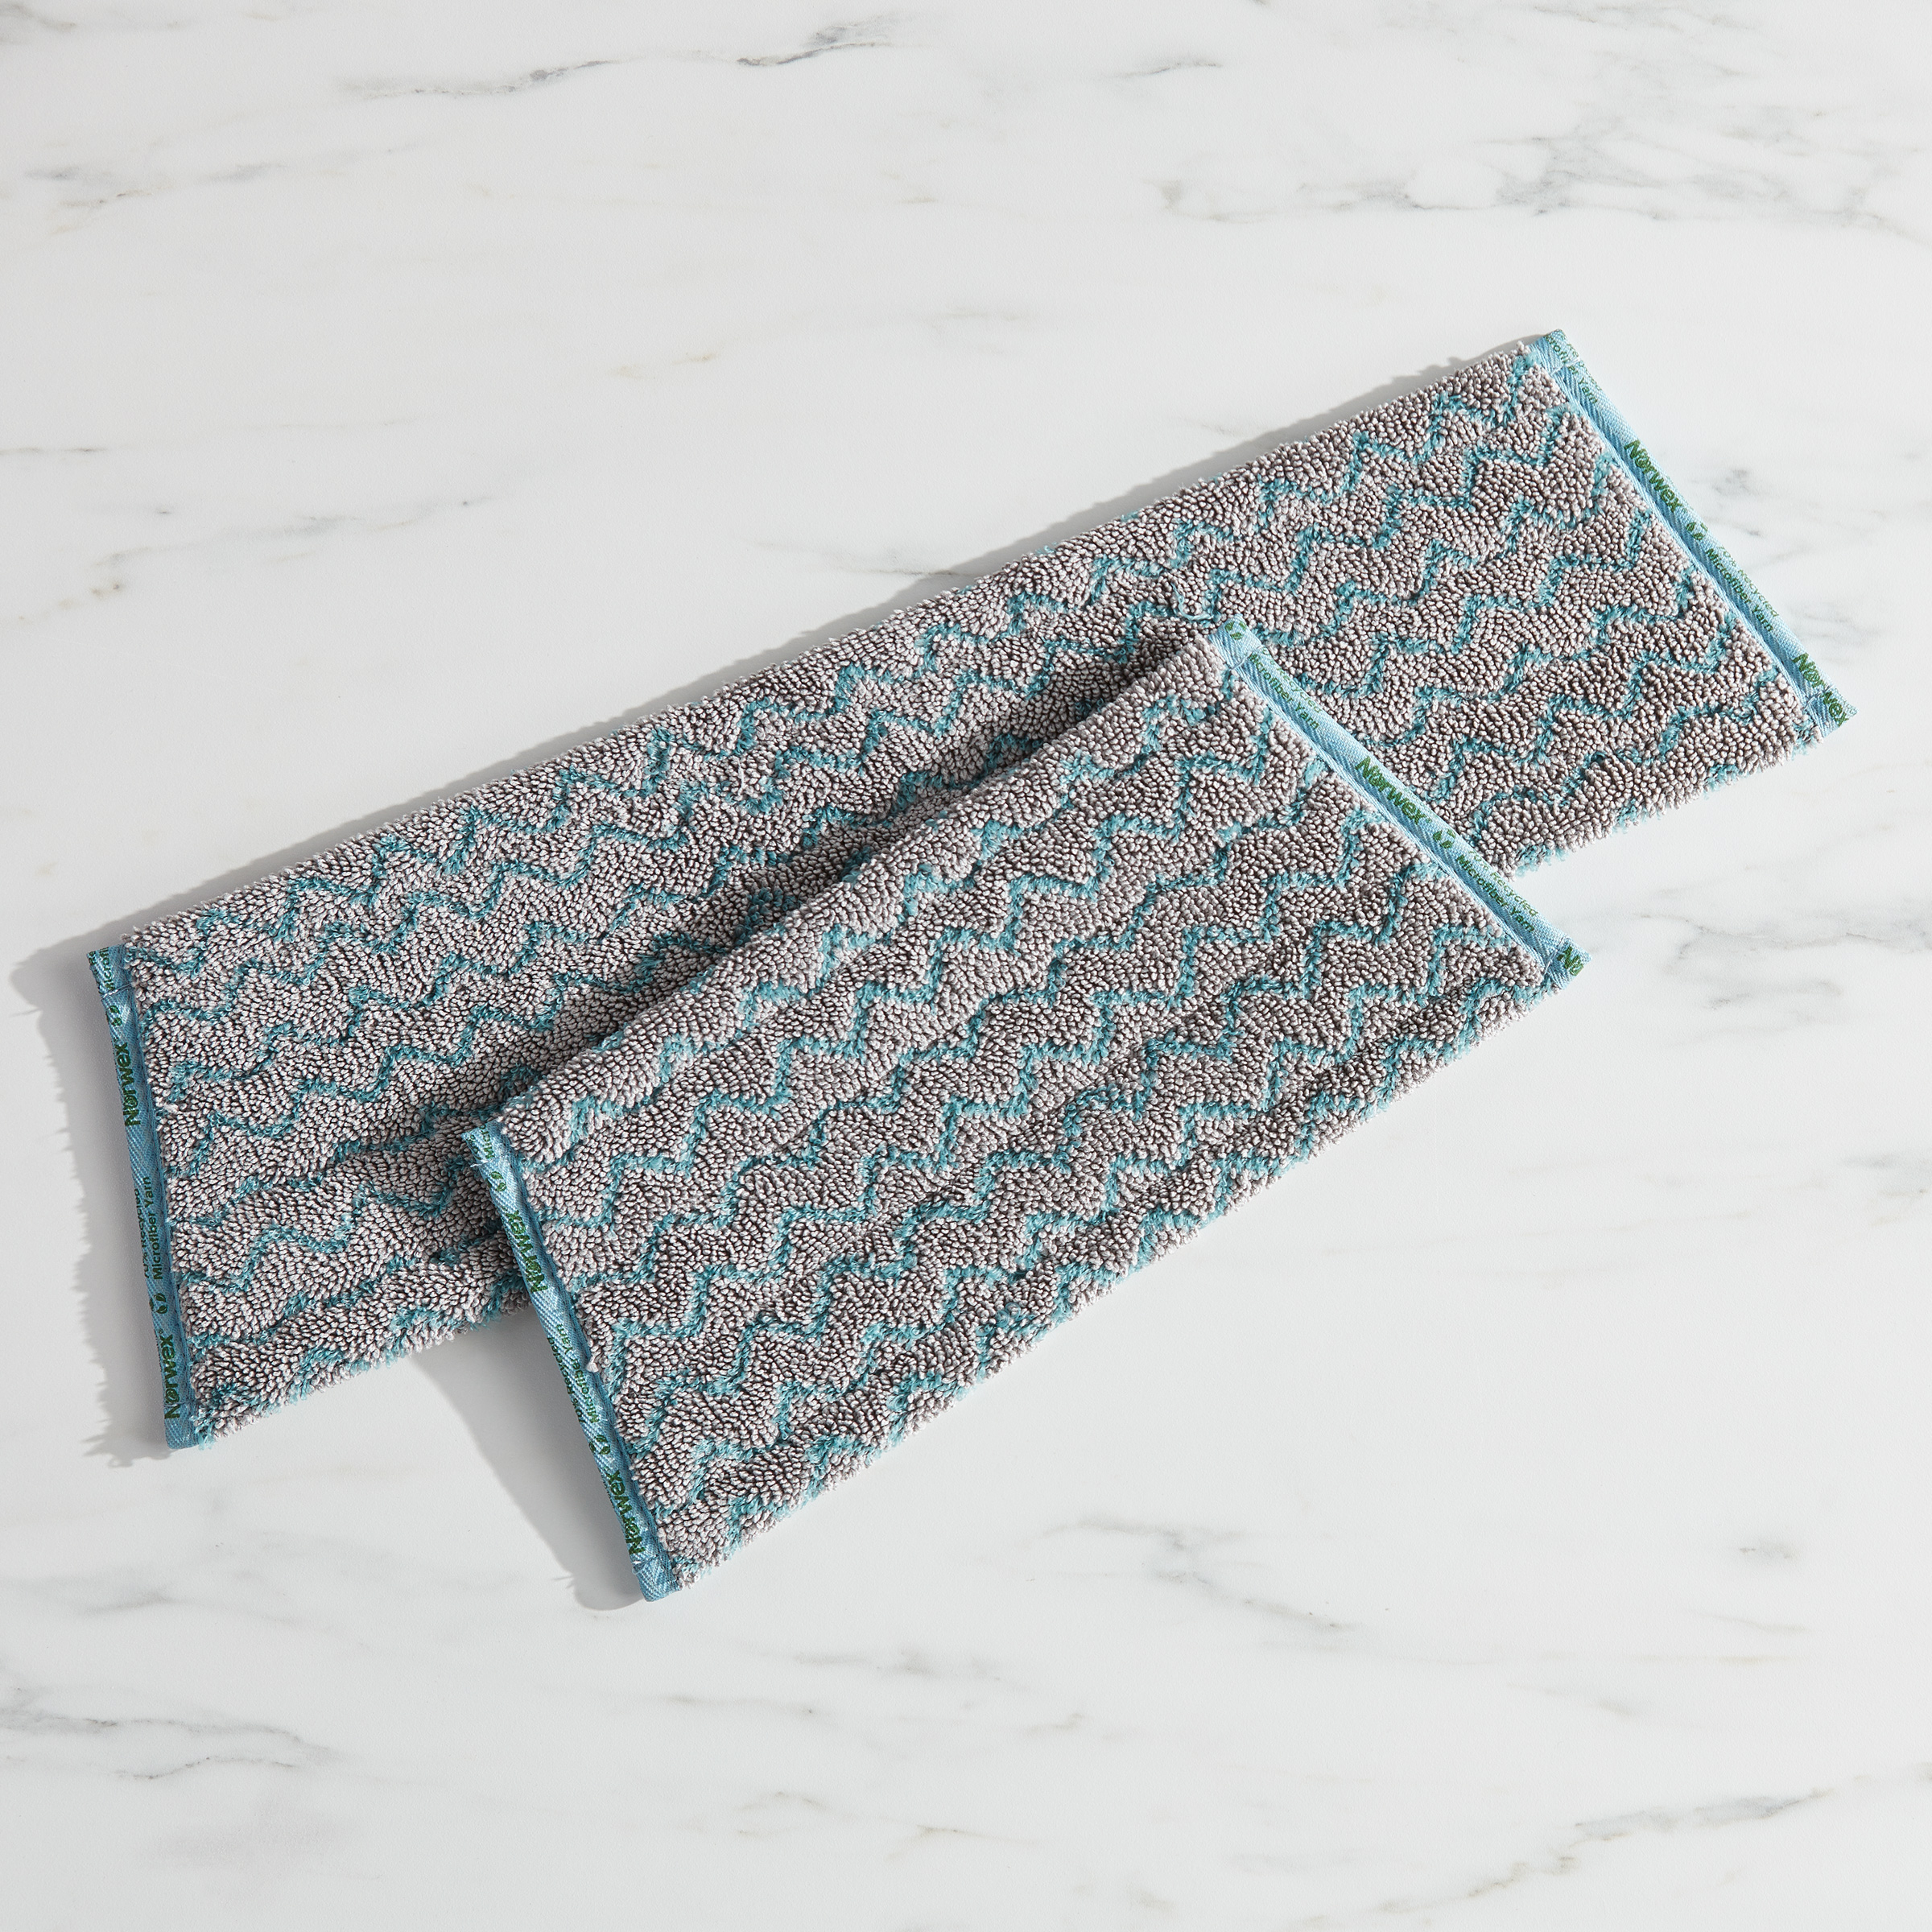 Norwex Tile Mop Heads - Large and Small